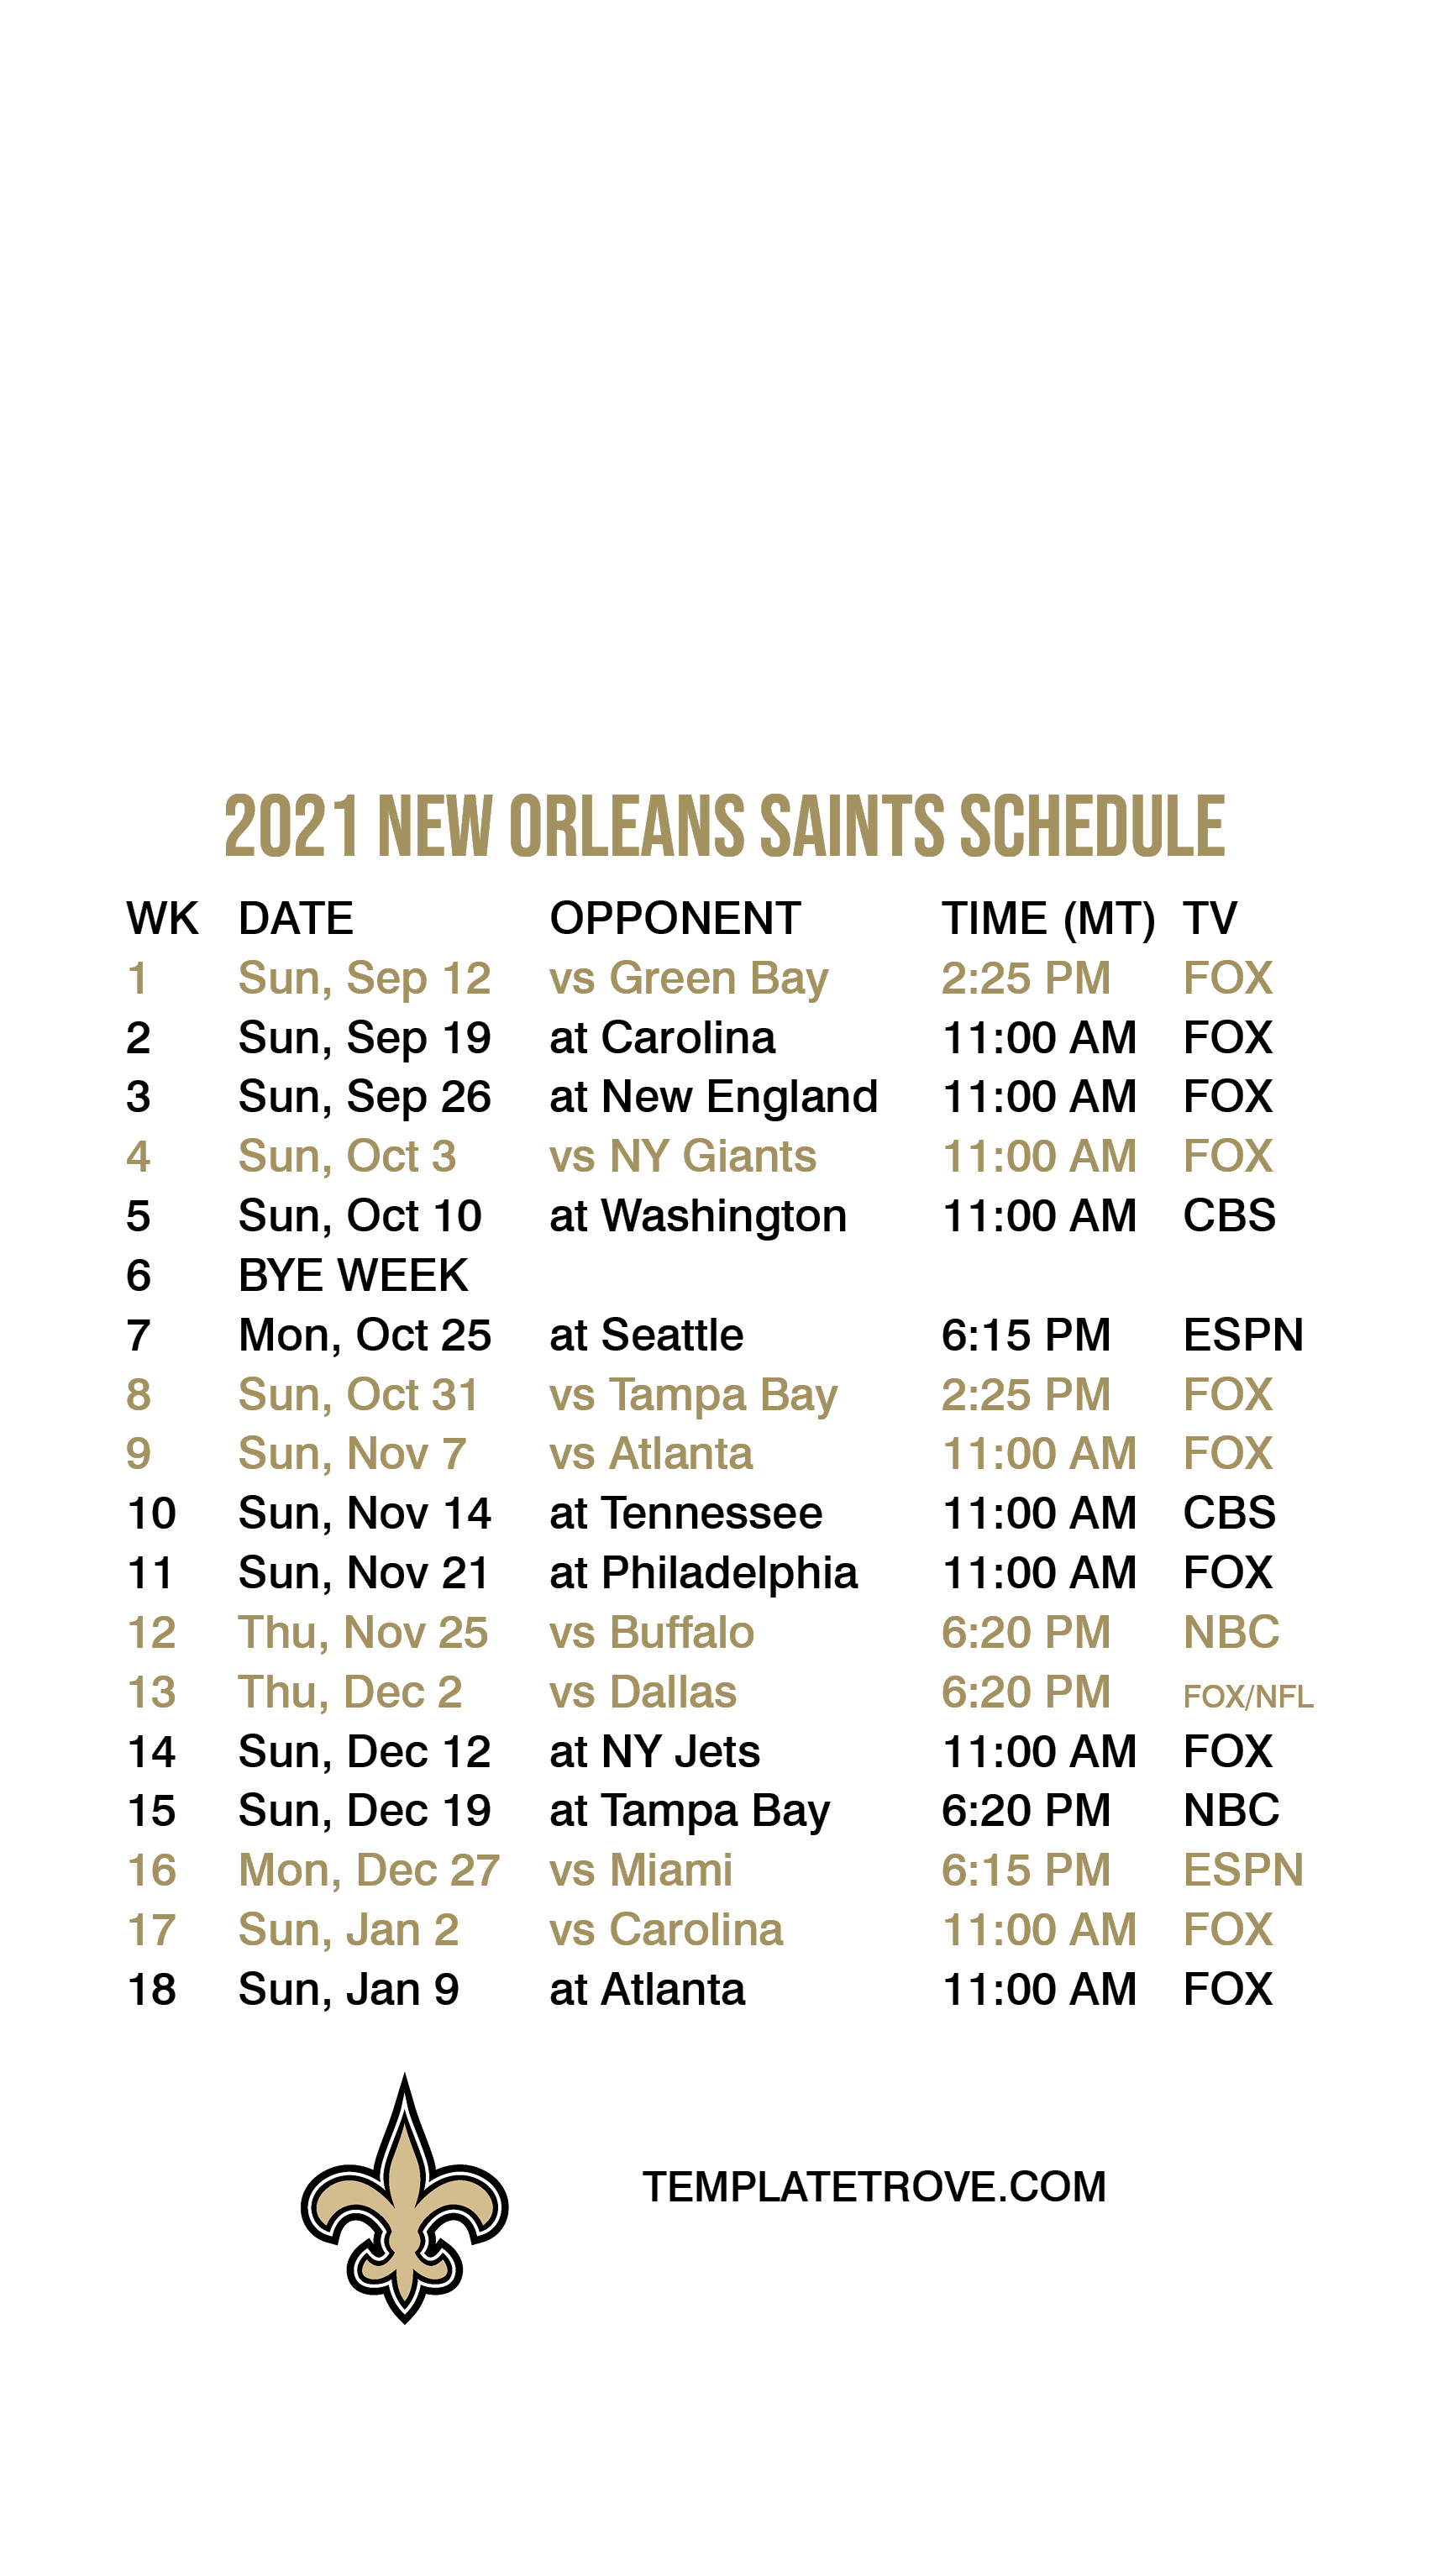 2021-2022 New Orleans Saints Lock Screen Schedule for iPhone 6-7-8 Plus